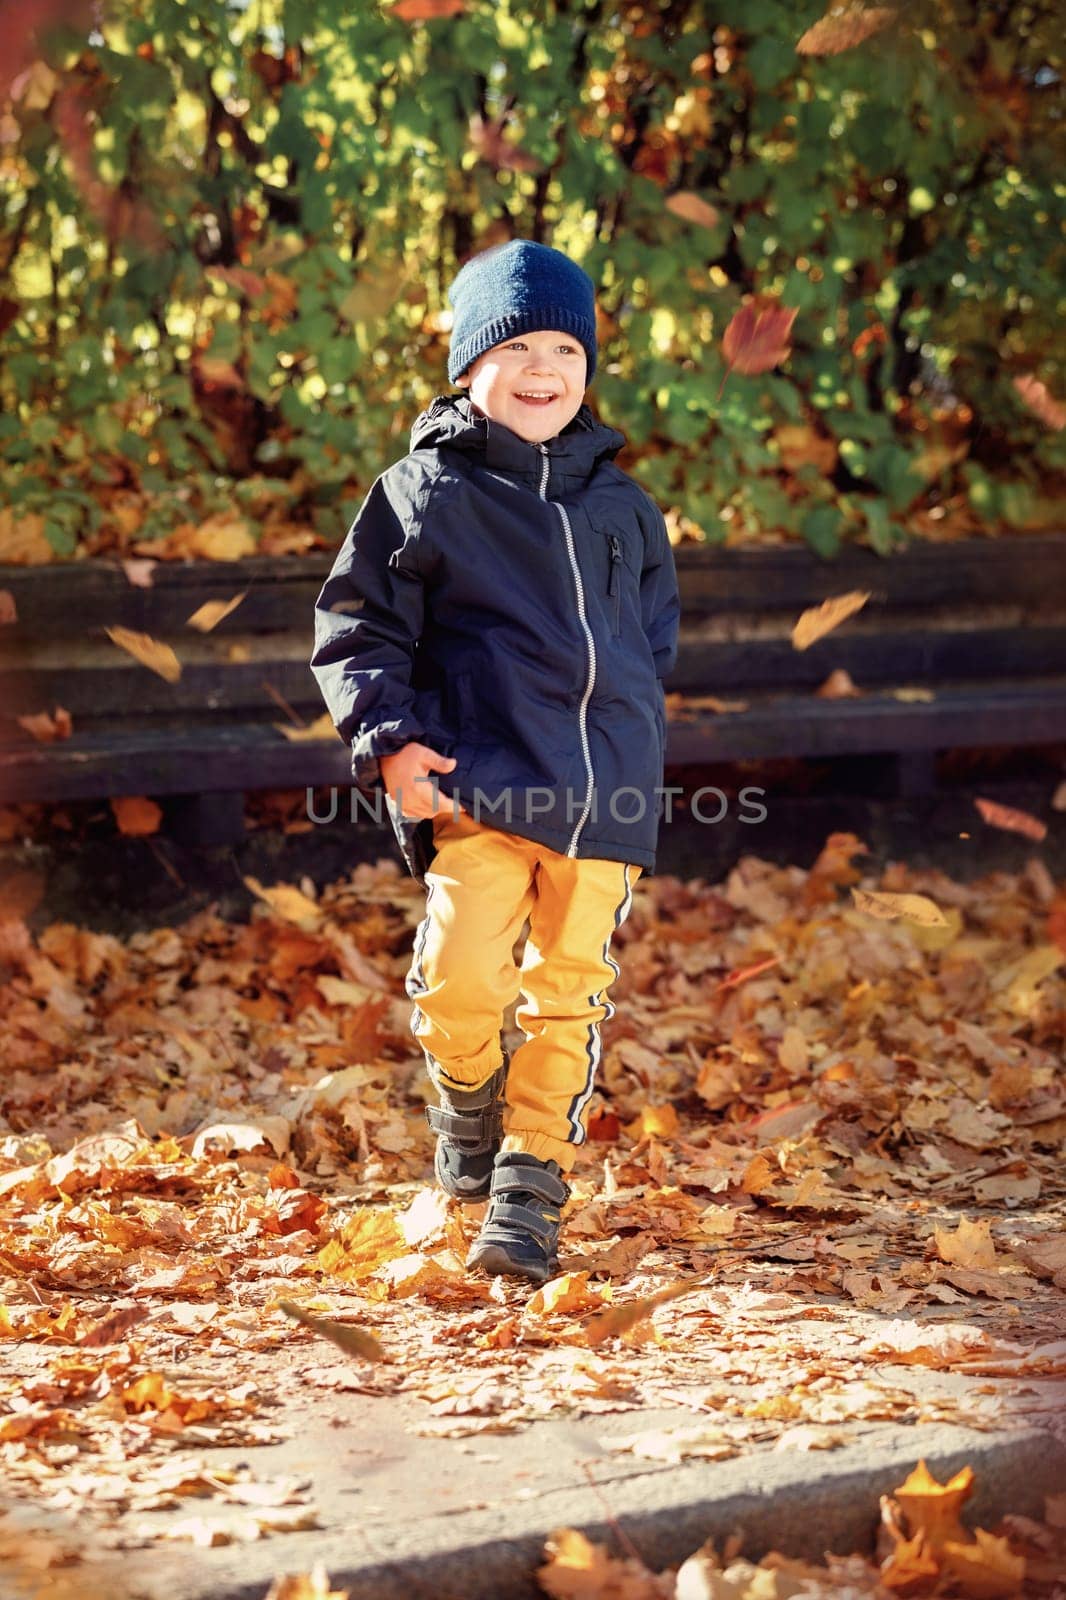 Kid play in autumn park. Child throwing yellow leaves. Child boy with oak and maple leaf. Fall foliage. Family outdoor fun in autumn. Toddler or preschooler in fall.